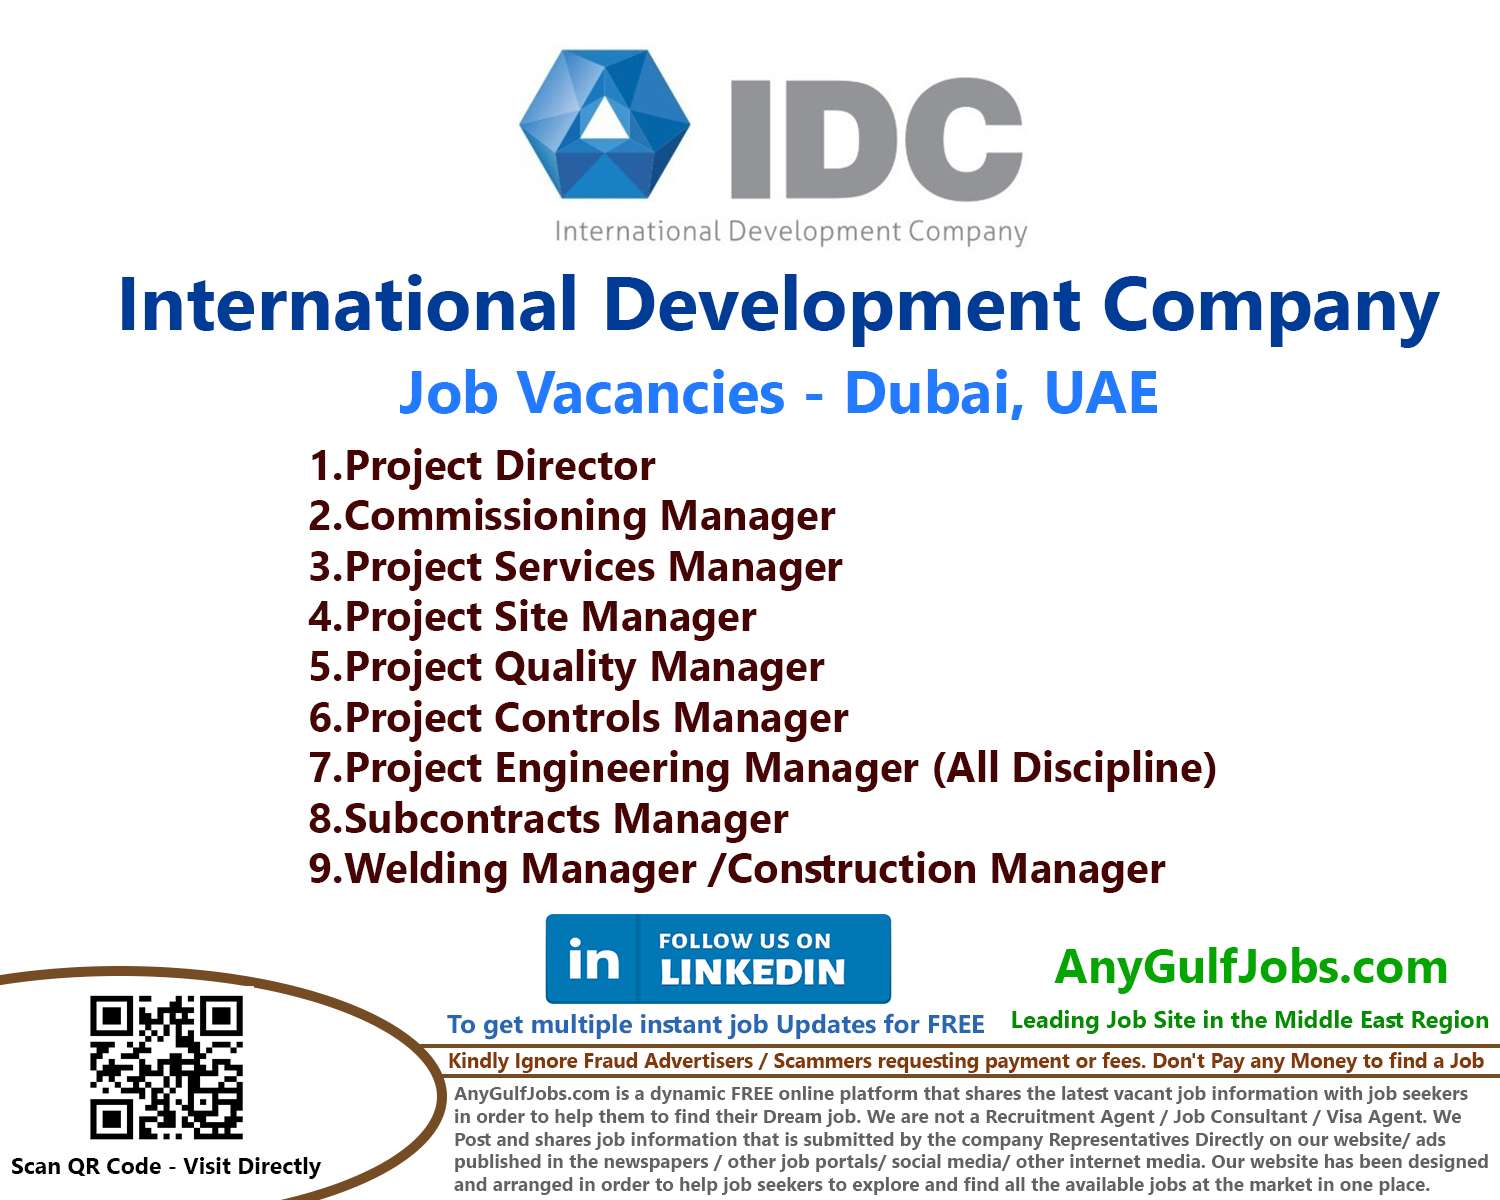 International Development Company Job Vacancies - Dubai, UAE, And Also We are going to describe to you the ways to get a job in International Development Company - Dubai, UAE.